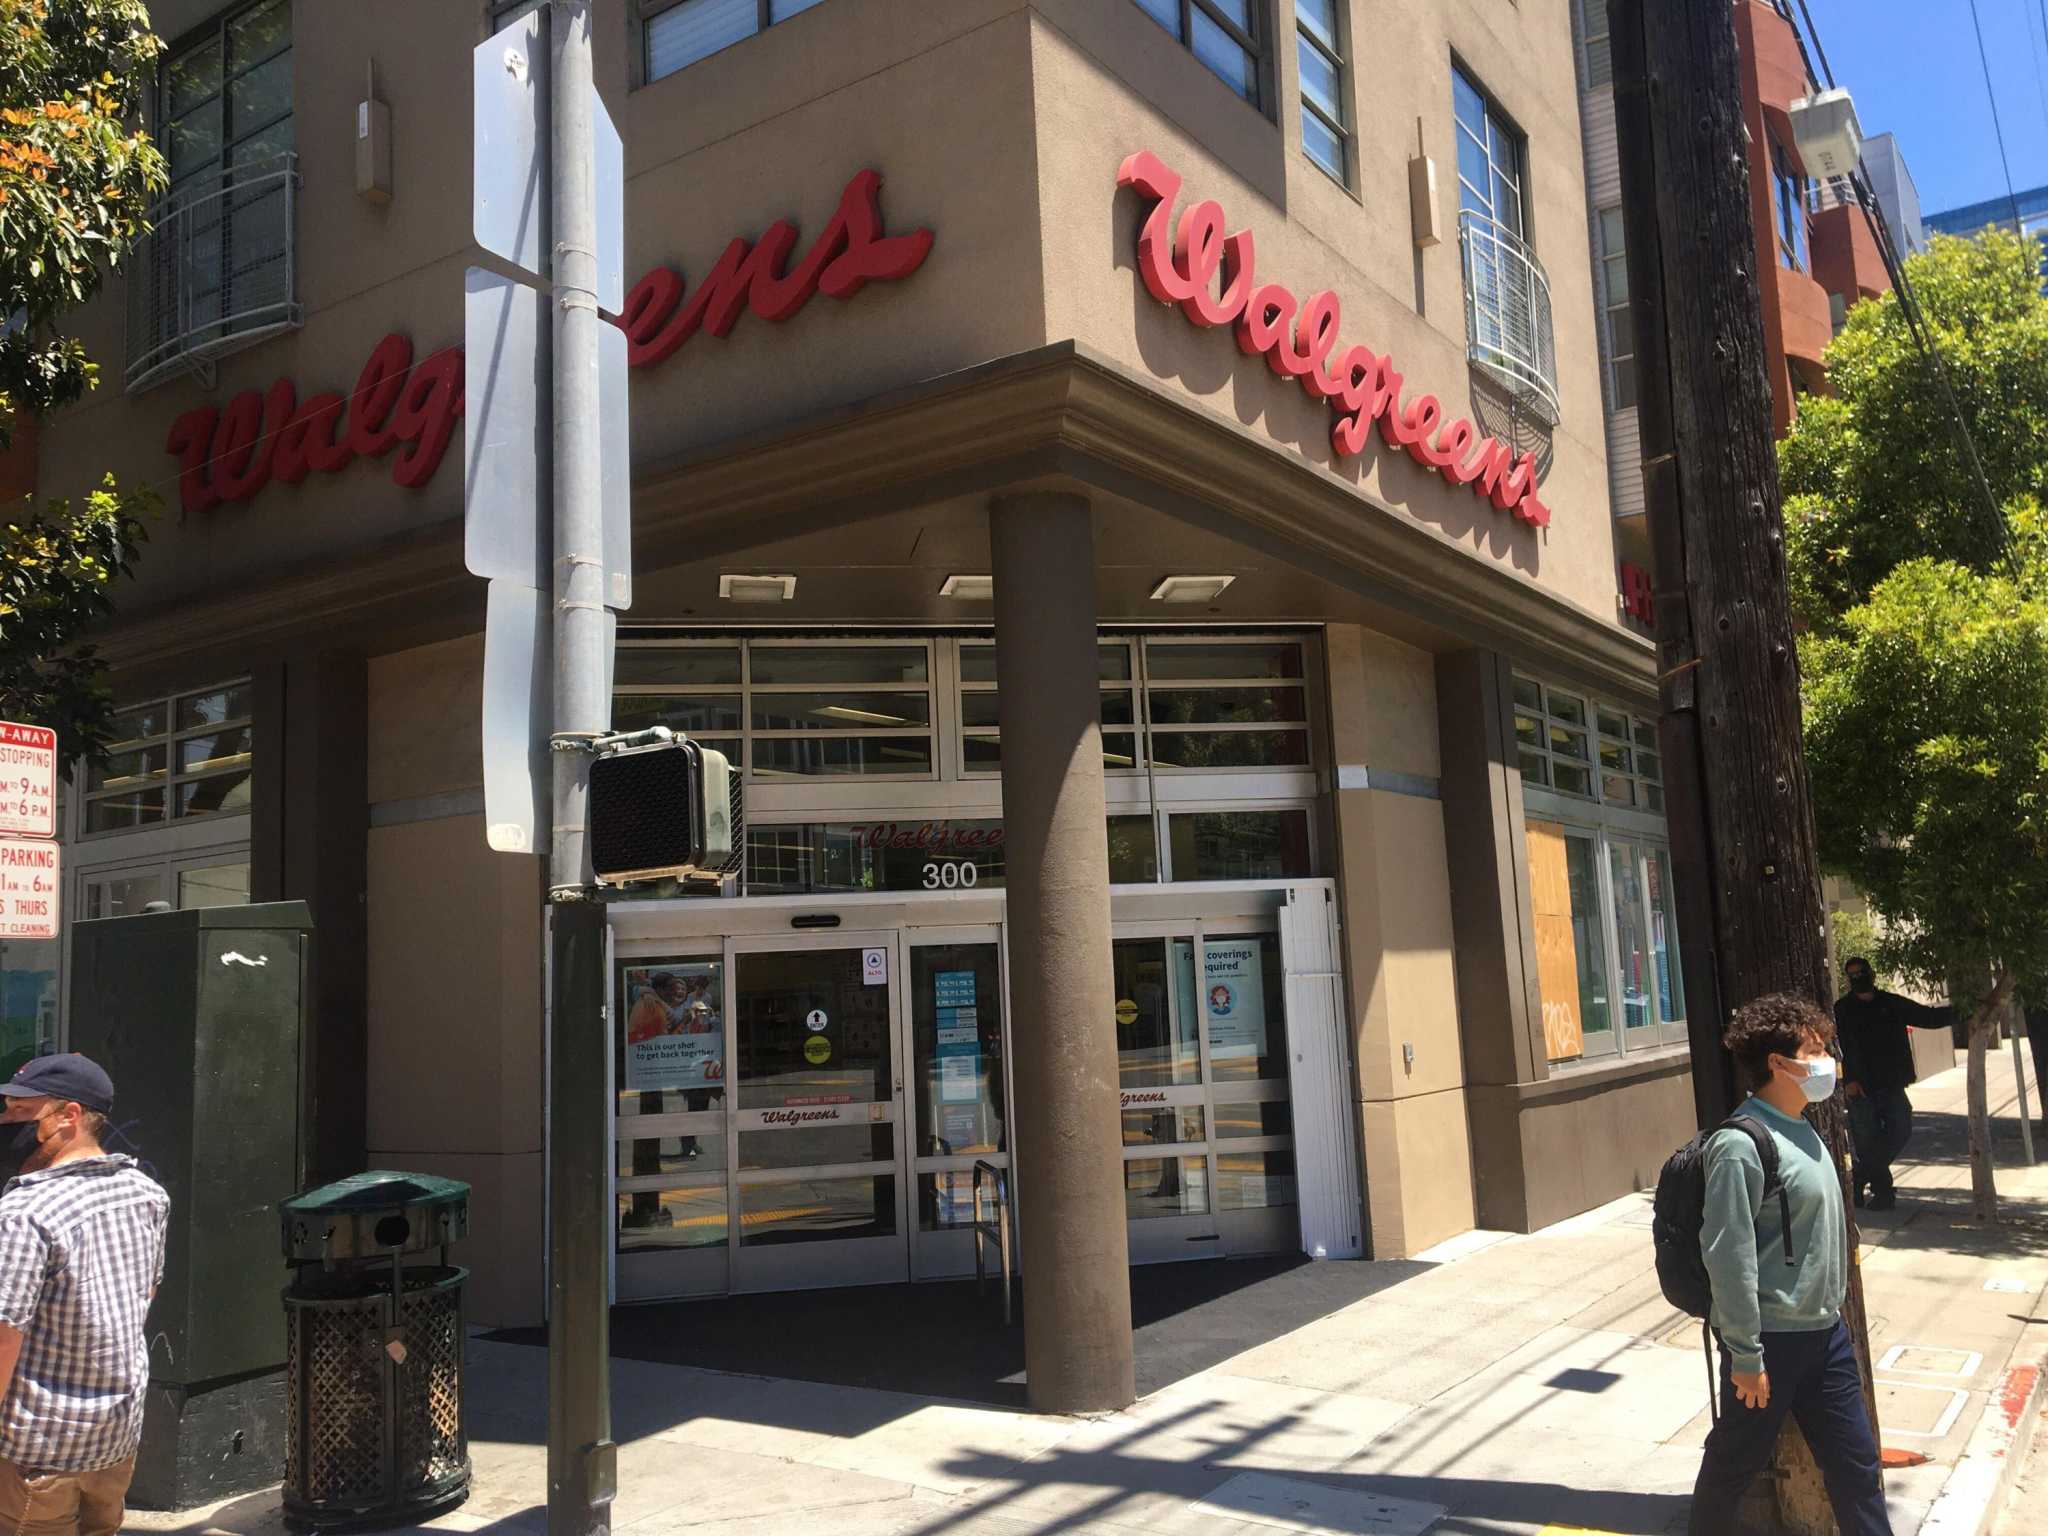 The exterior of the Walgreens store at the intersection of Gough and Fell streets in San Francisco, the site of a recent, brazen robbery captured on v